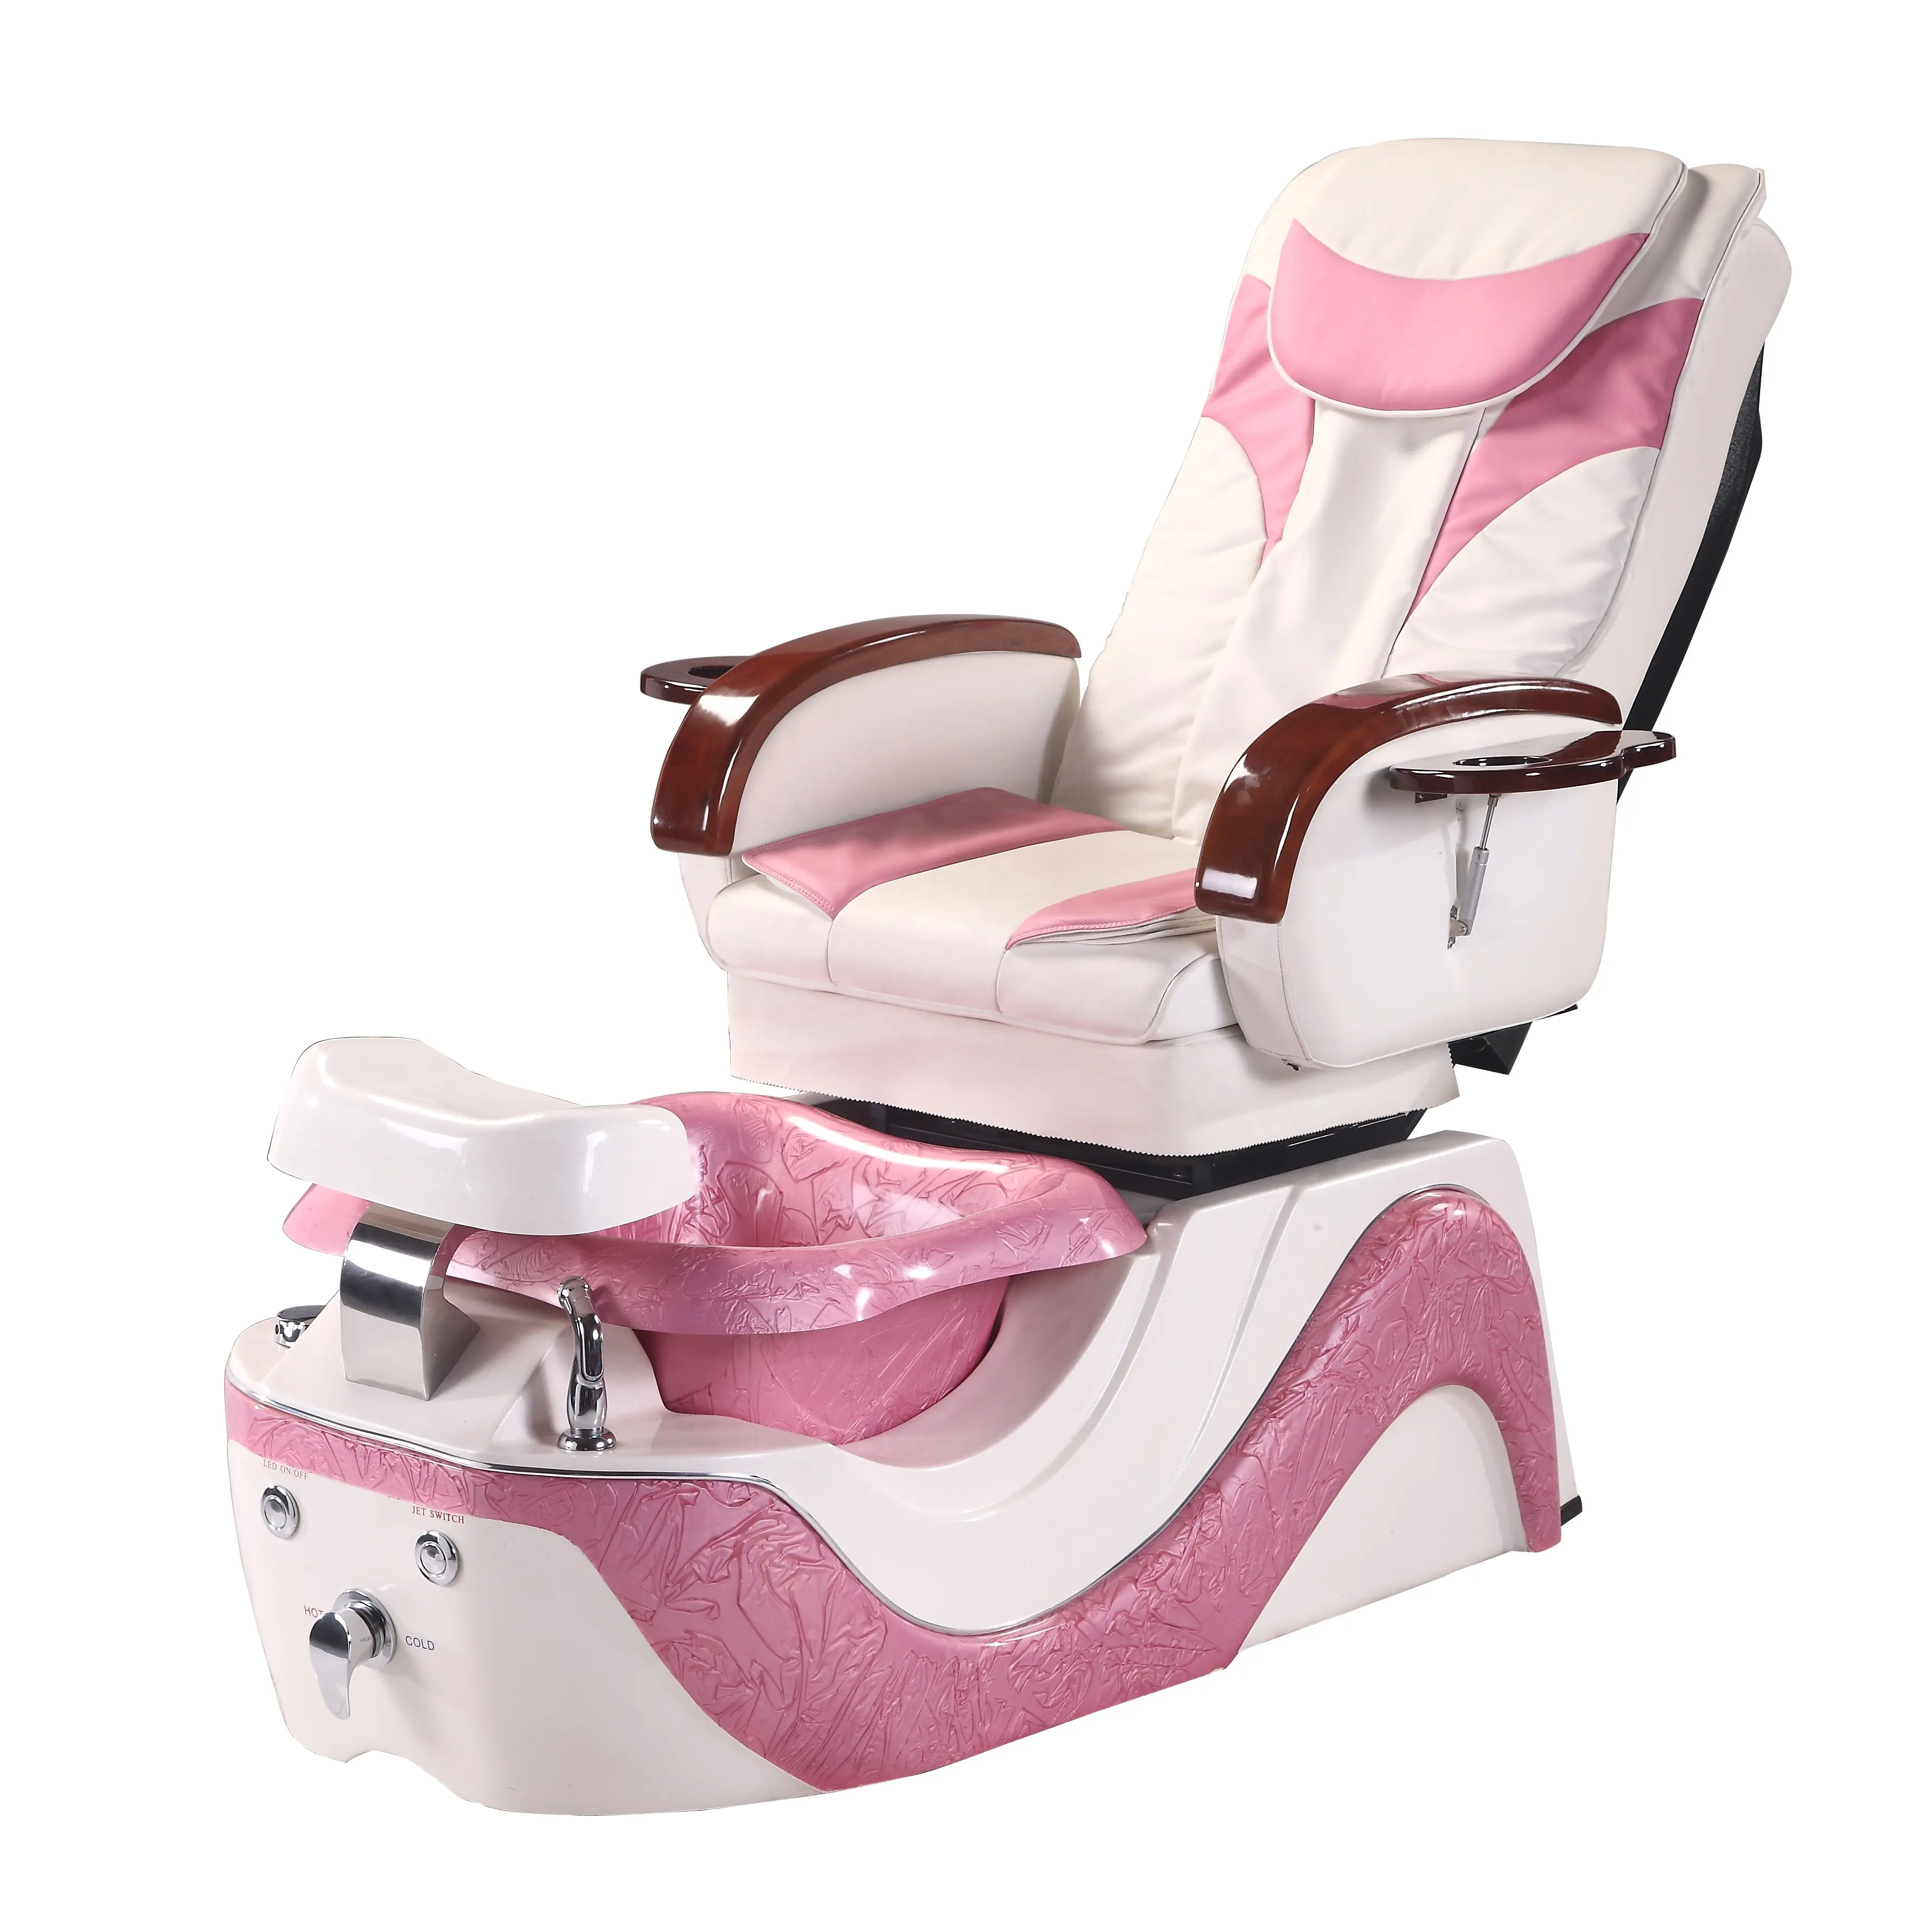 Pink professional spa manicure and pedicure massage chair with footbath bowl